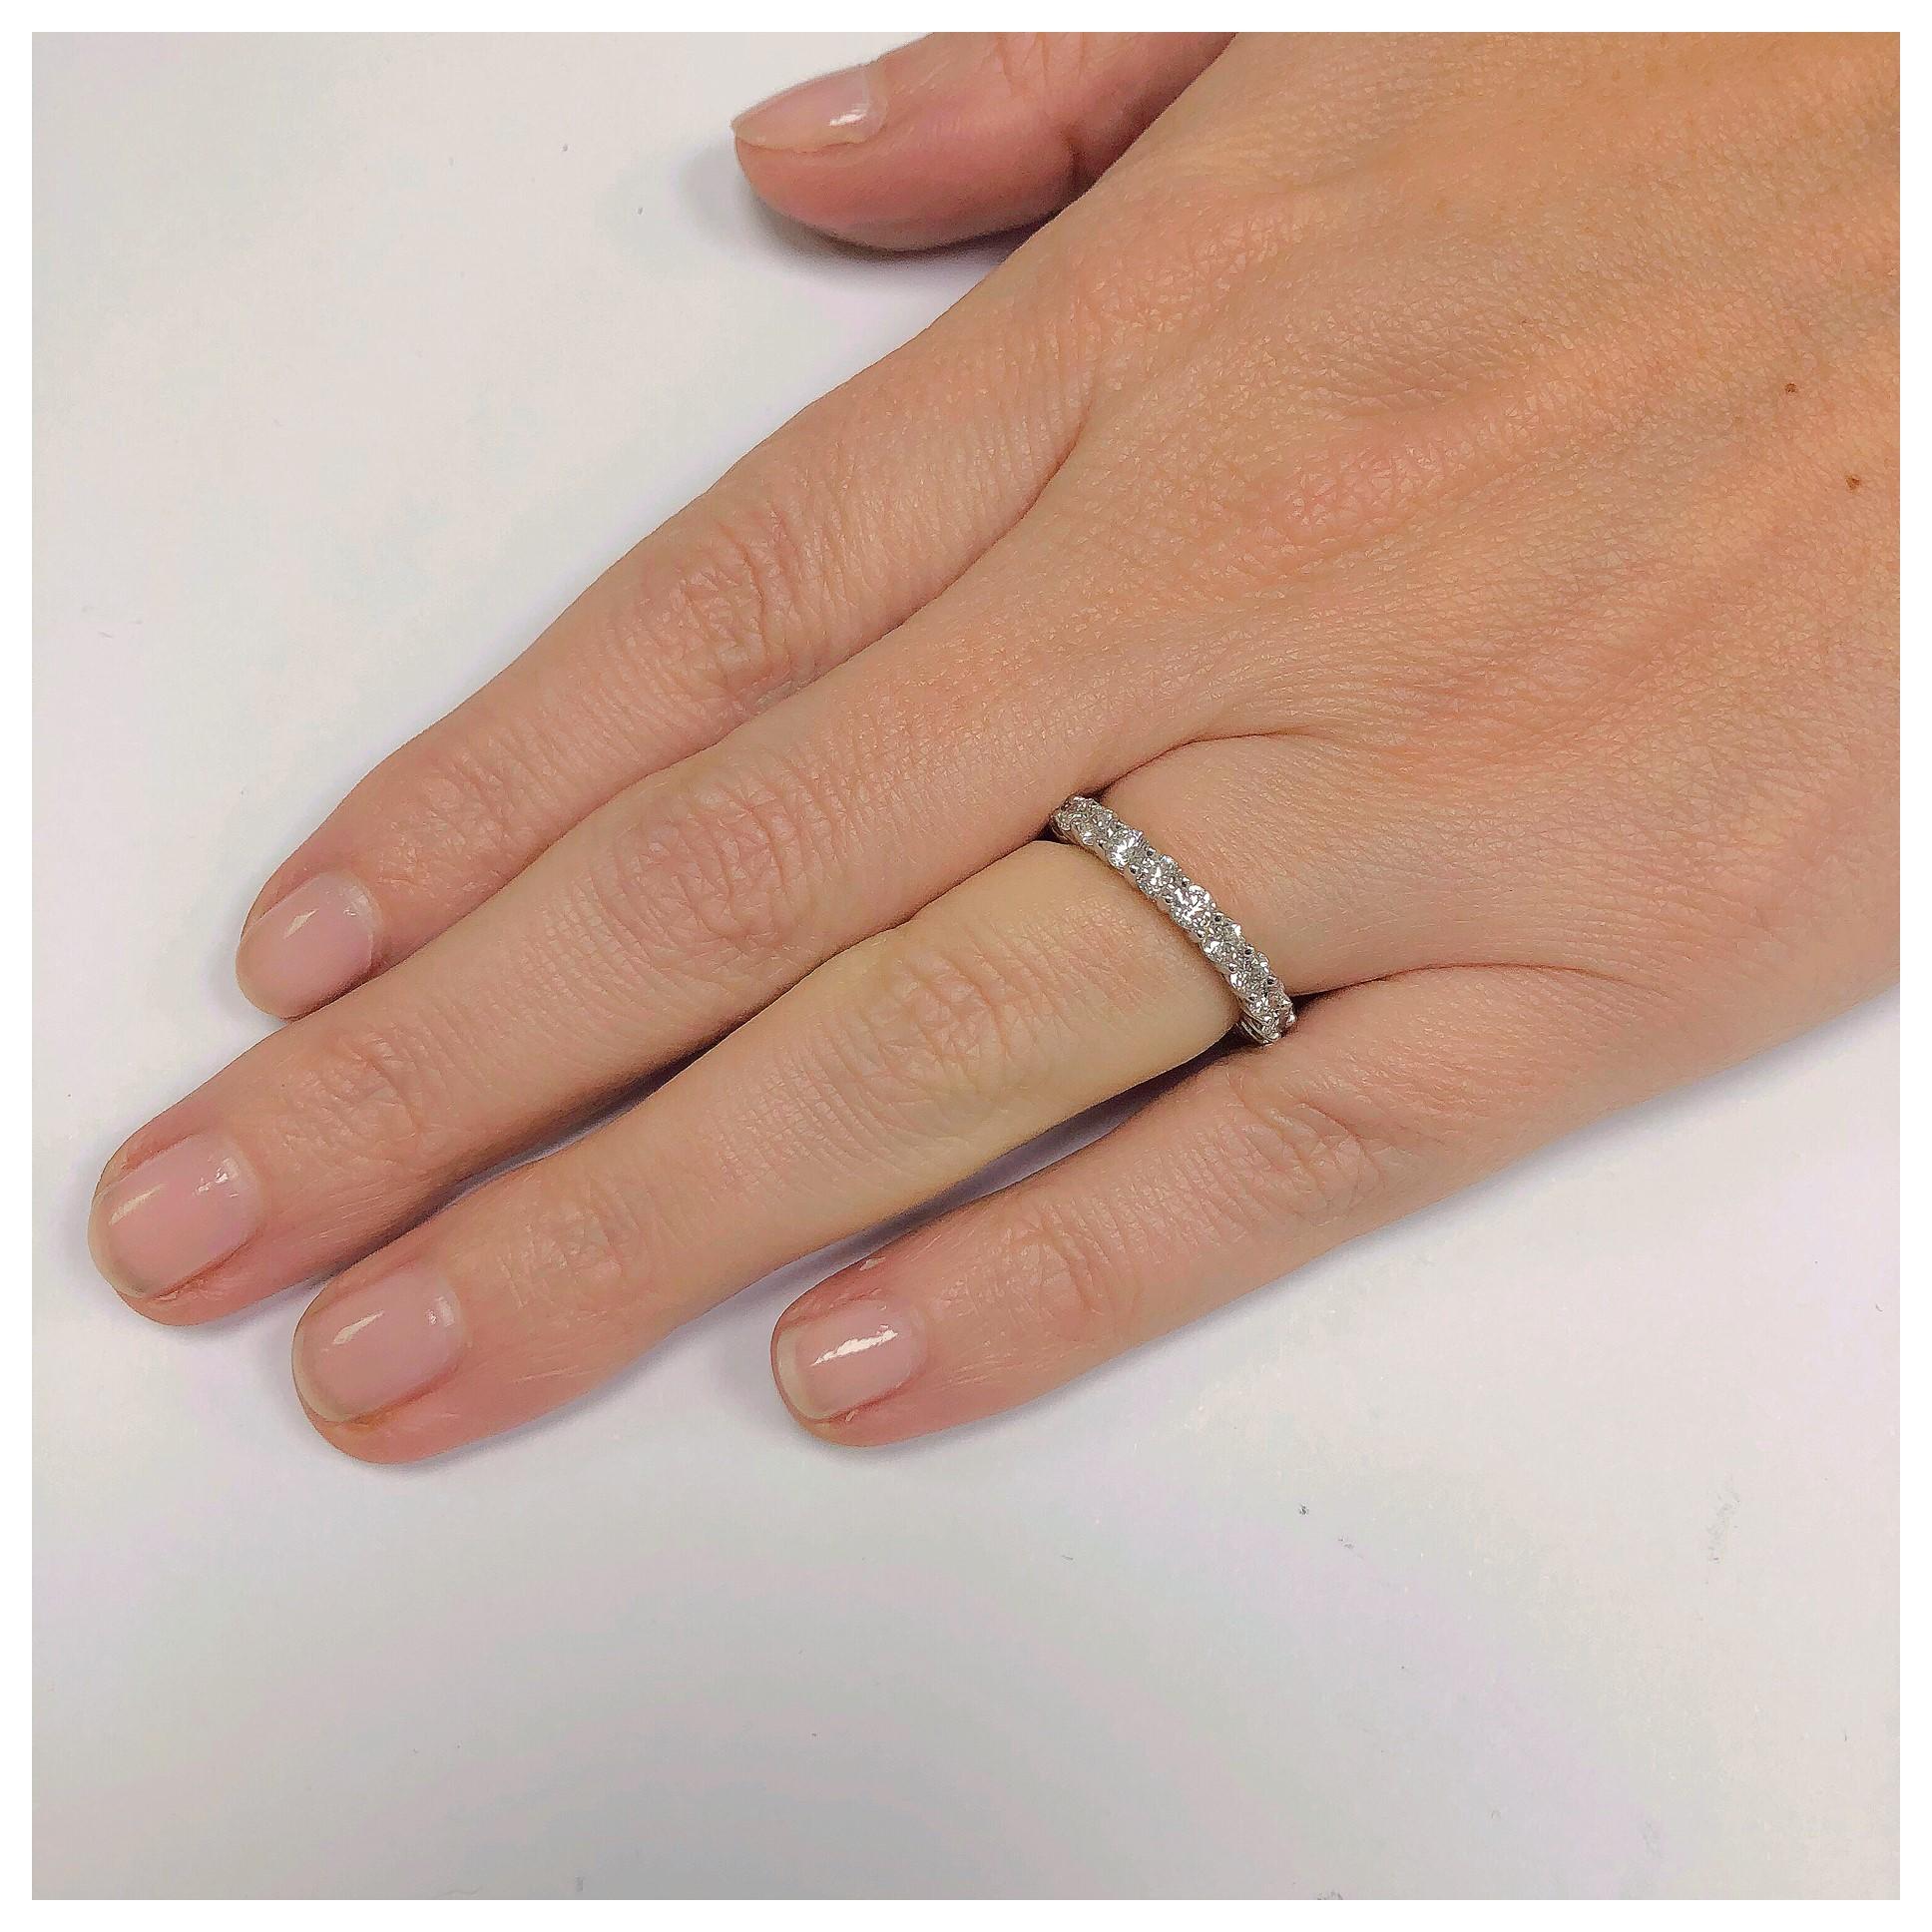 Beautiful shared prong eternity band in Platinum with 1.83 ct total weight of G color Si diamonds. It has an open gallery on the side and is a finger size 5. Not your finger size, we would gladly make one to fit! If you don't see something, say